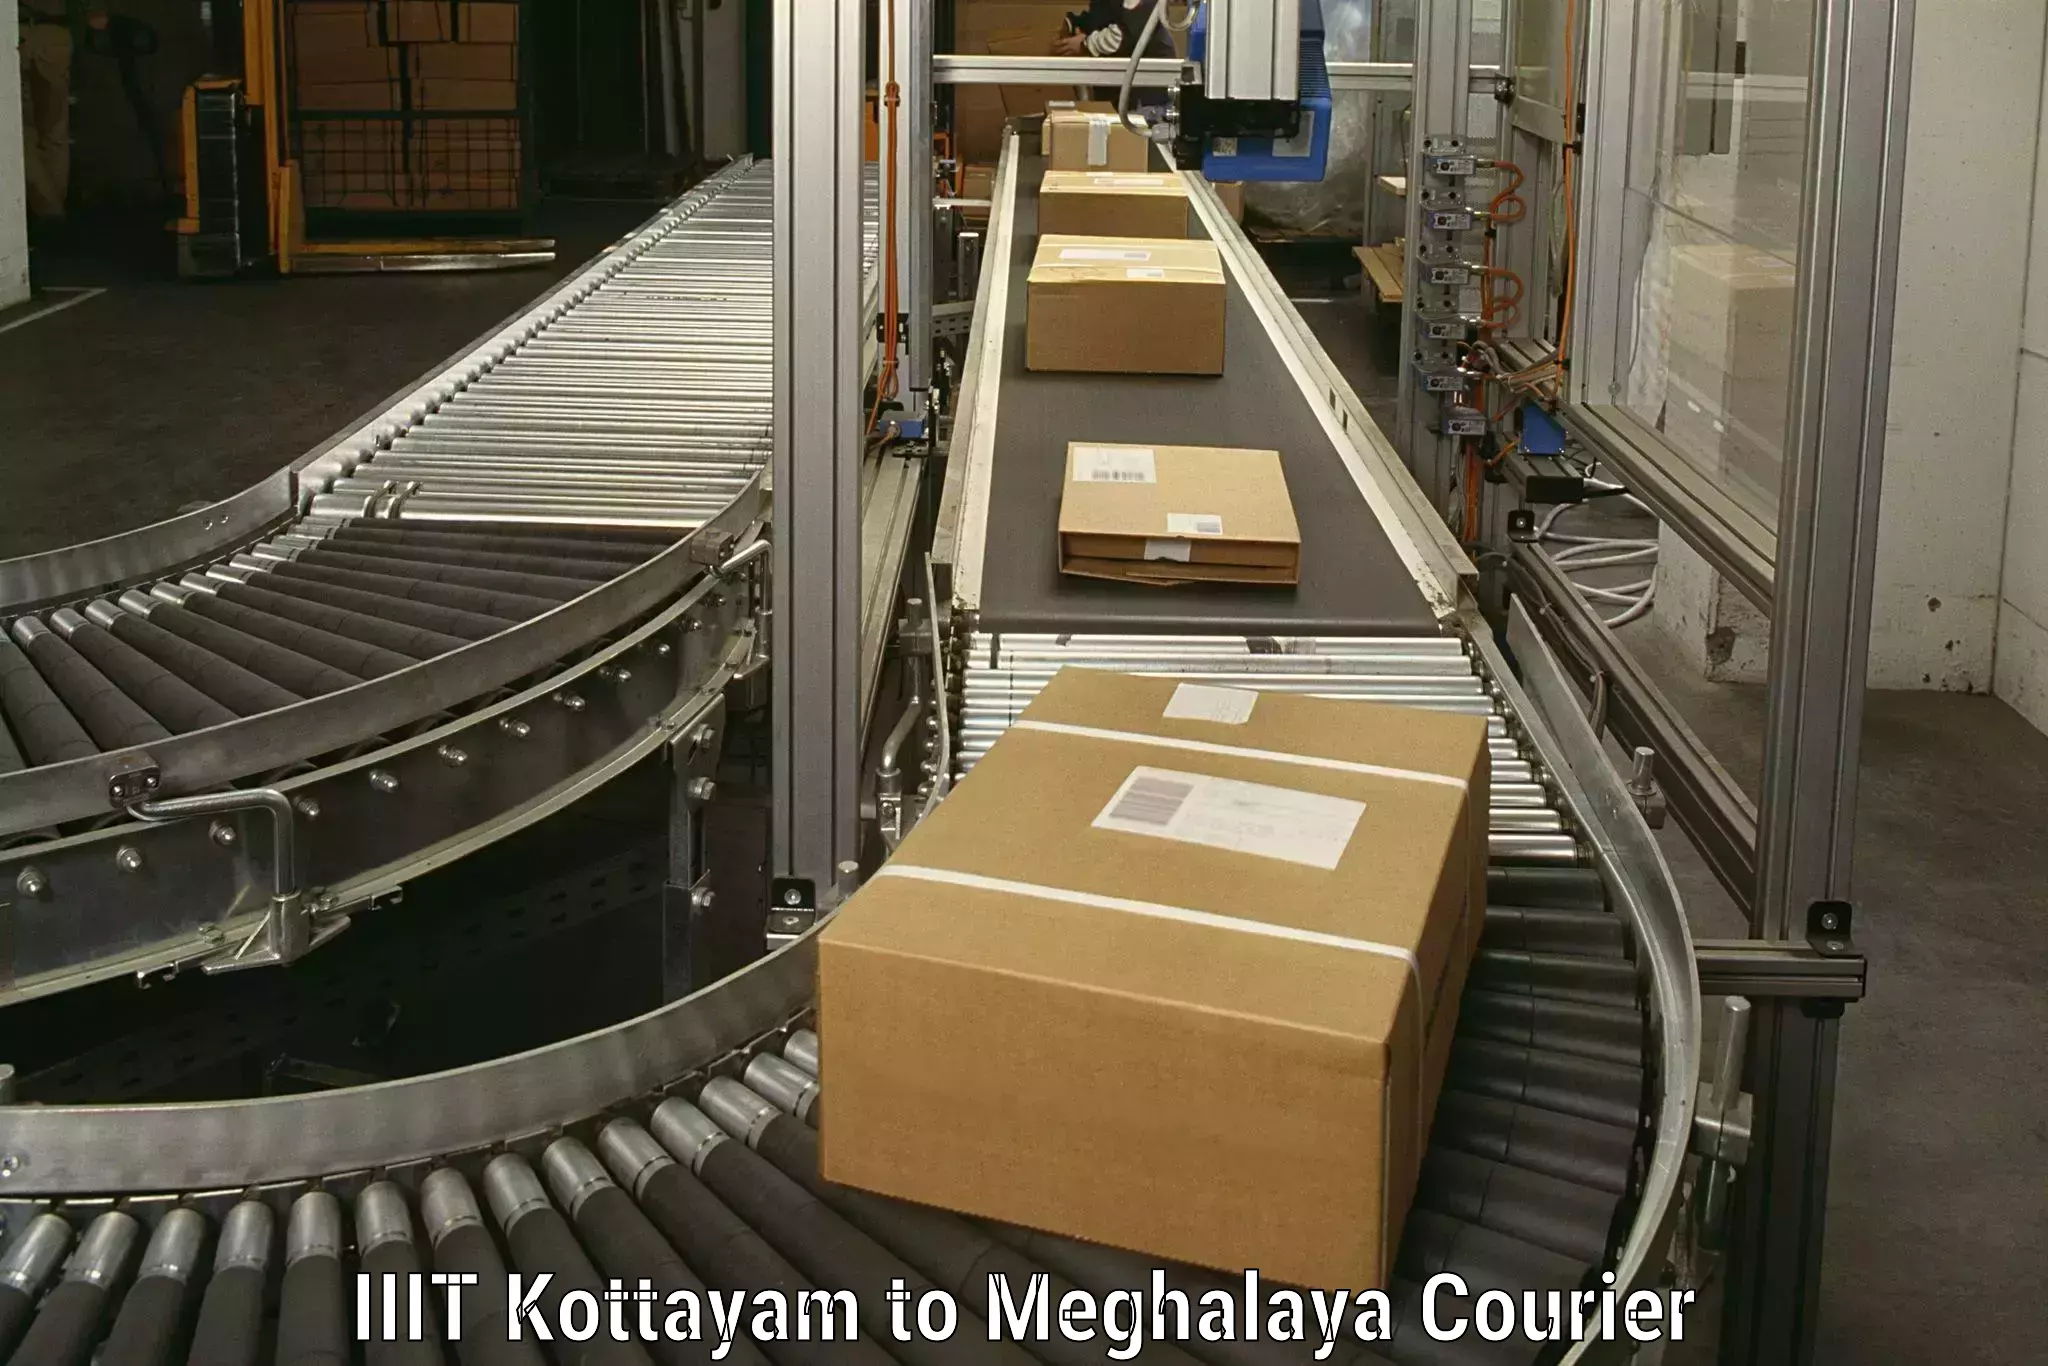 Furniture transport specialists IIIT Kottayam to Shillong